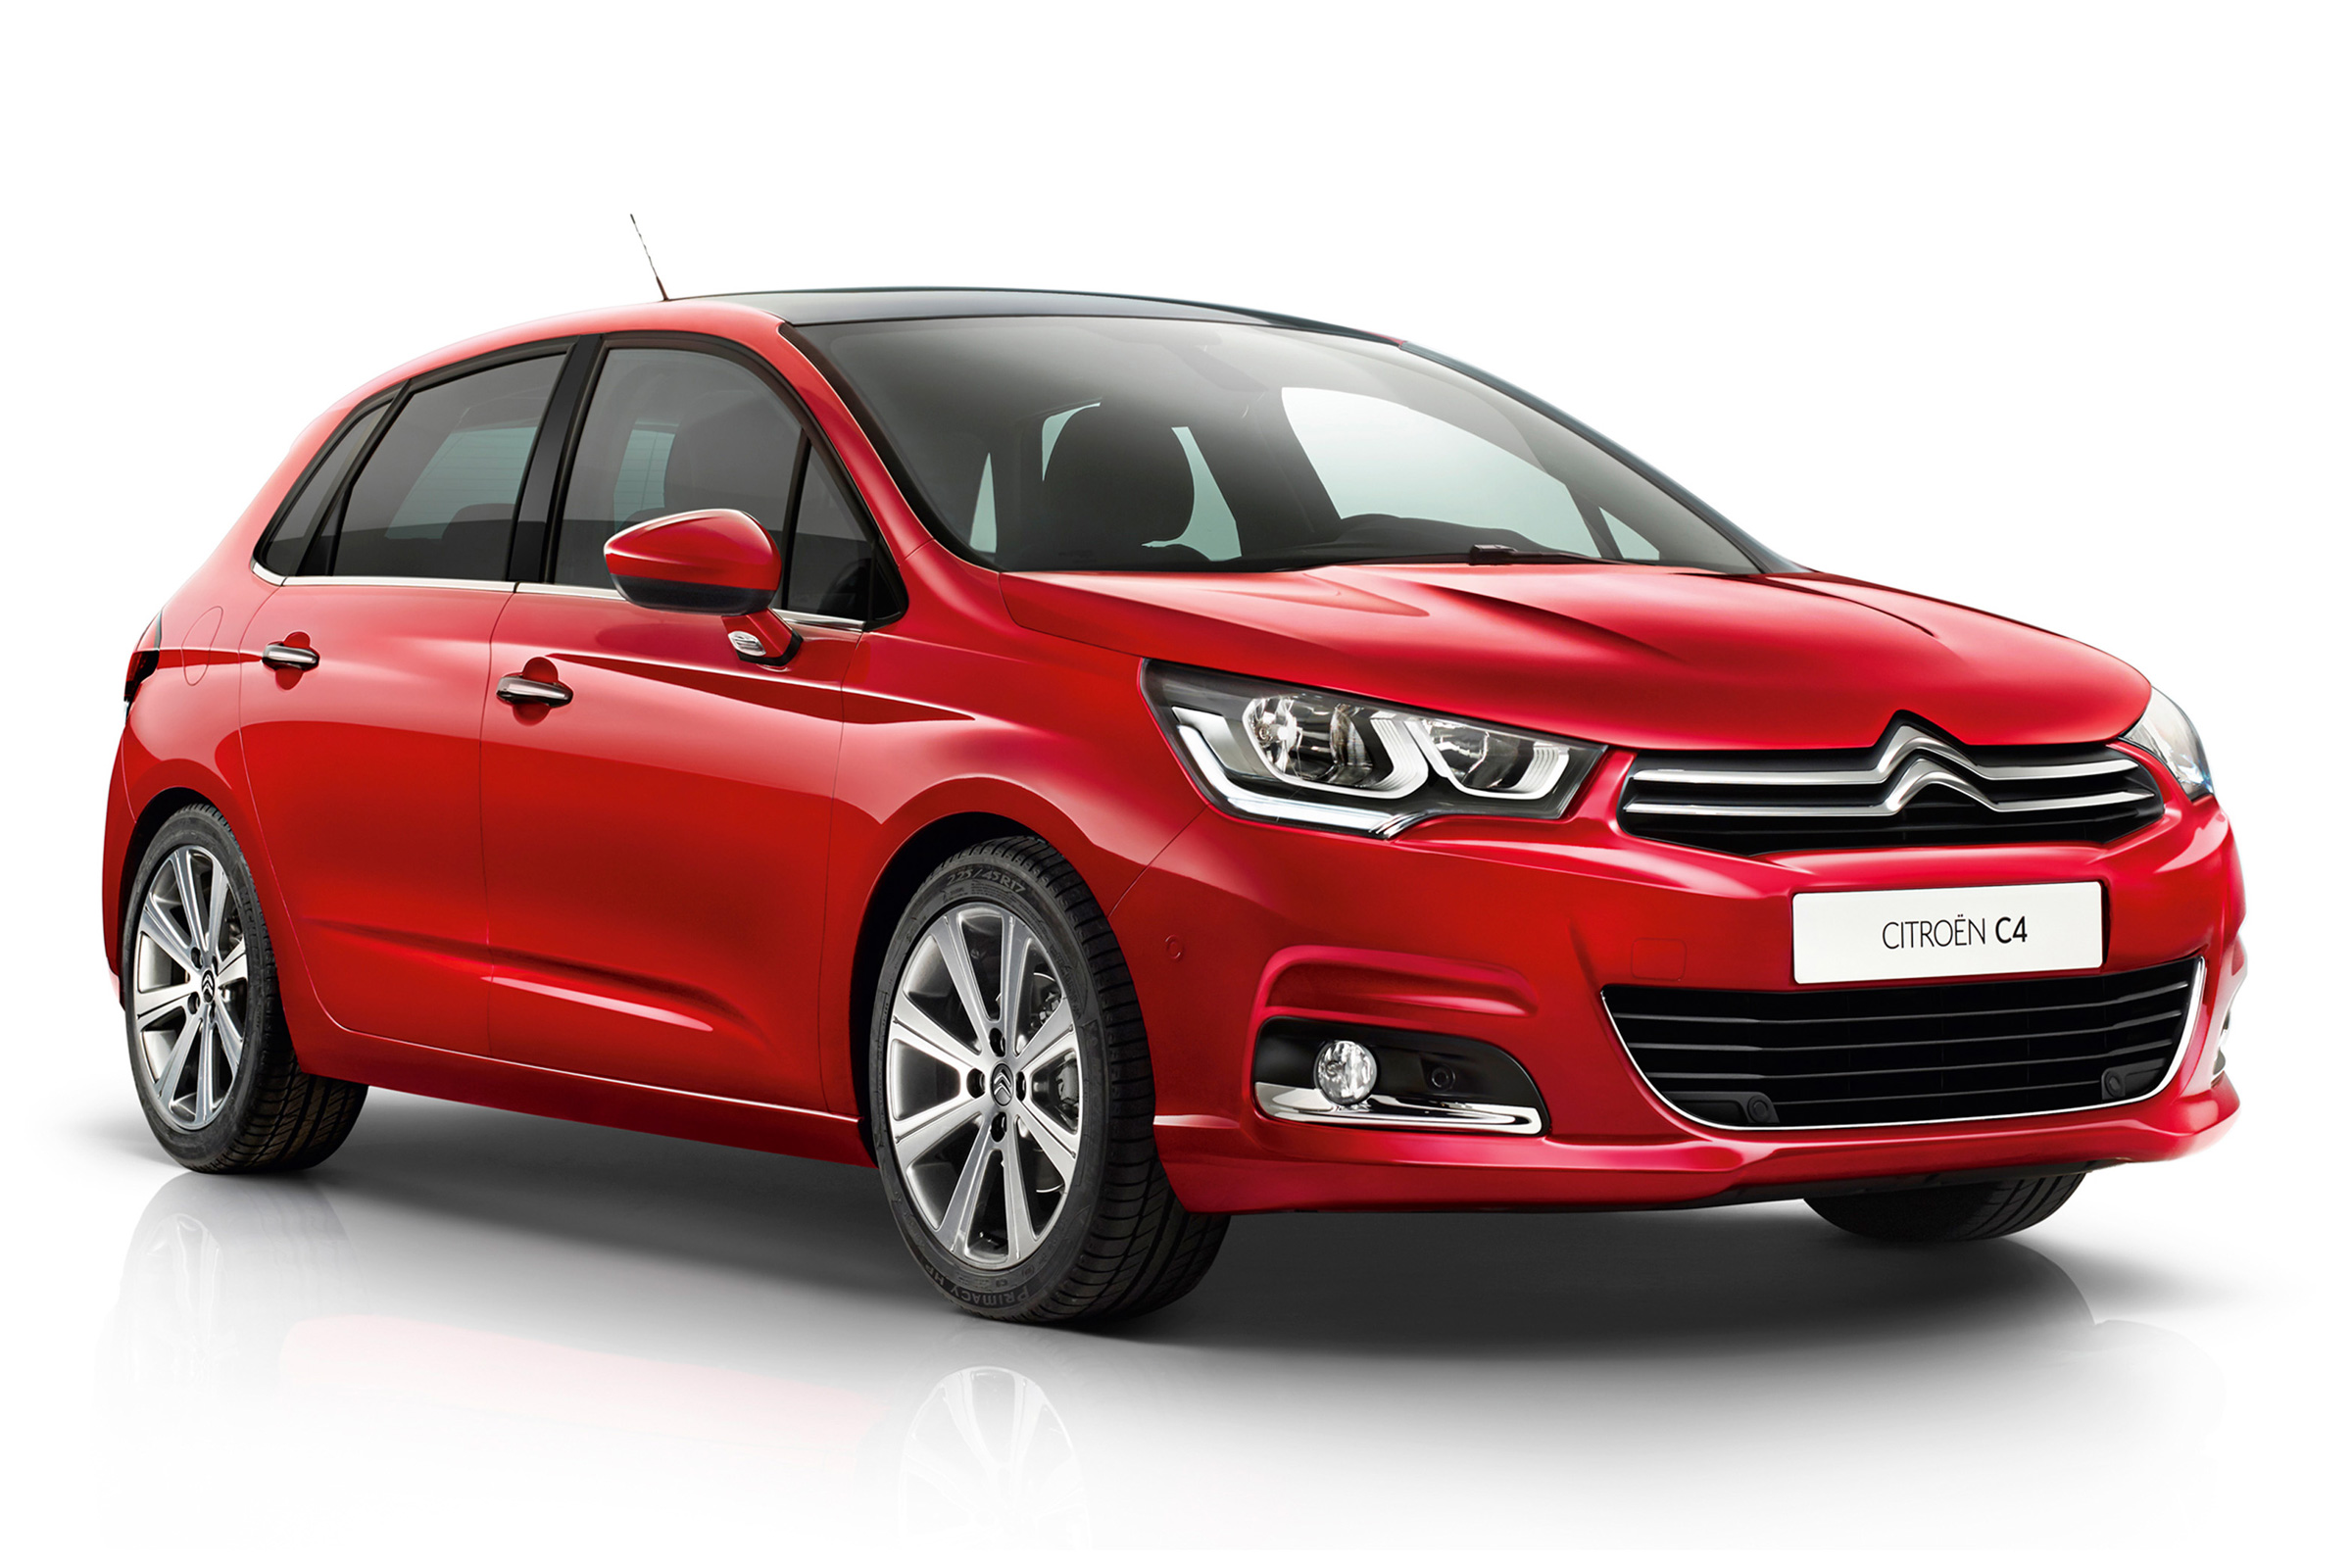 Prices And Specs For 2015 Citroen C4 | Carbuyer